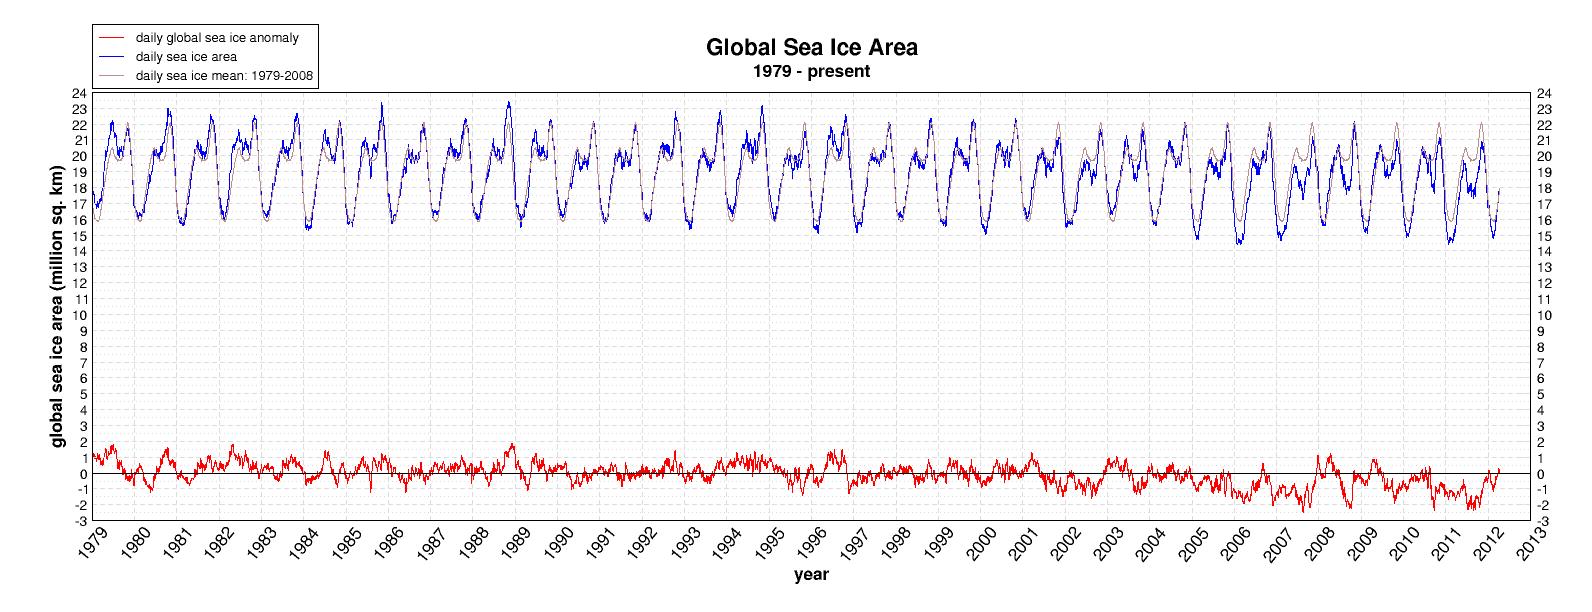 http://agfdag.files.wordpress.com/2012/04/global-daily-ice-area-withtrend.jpg